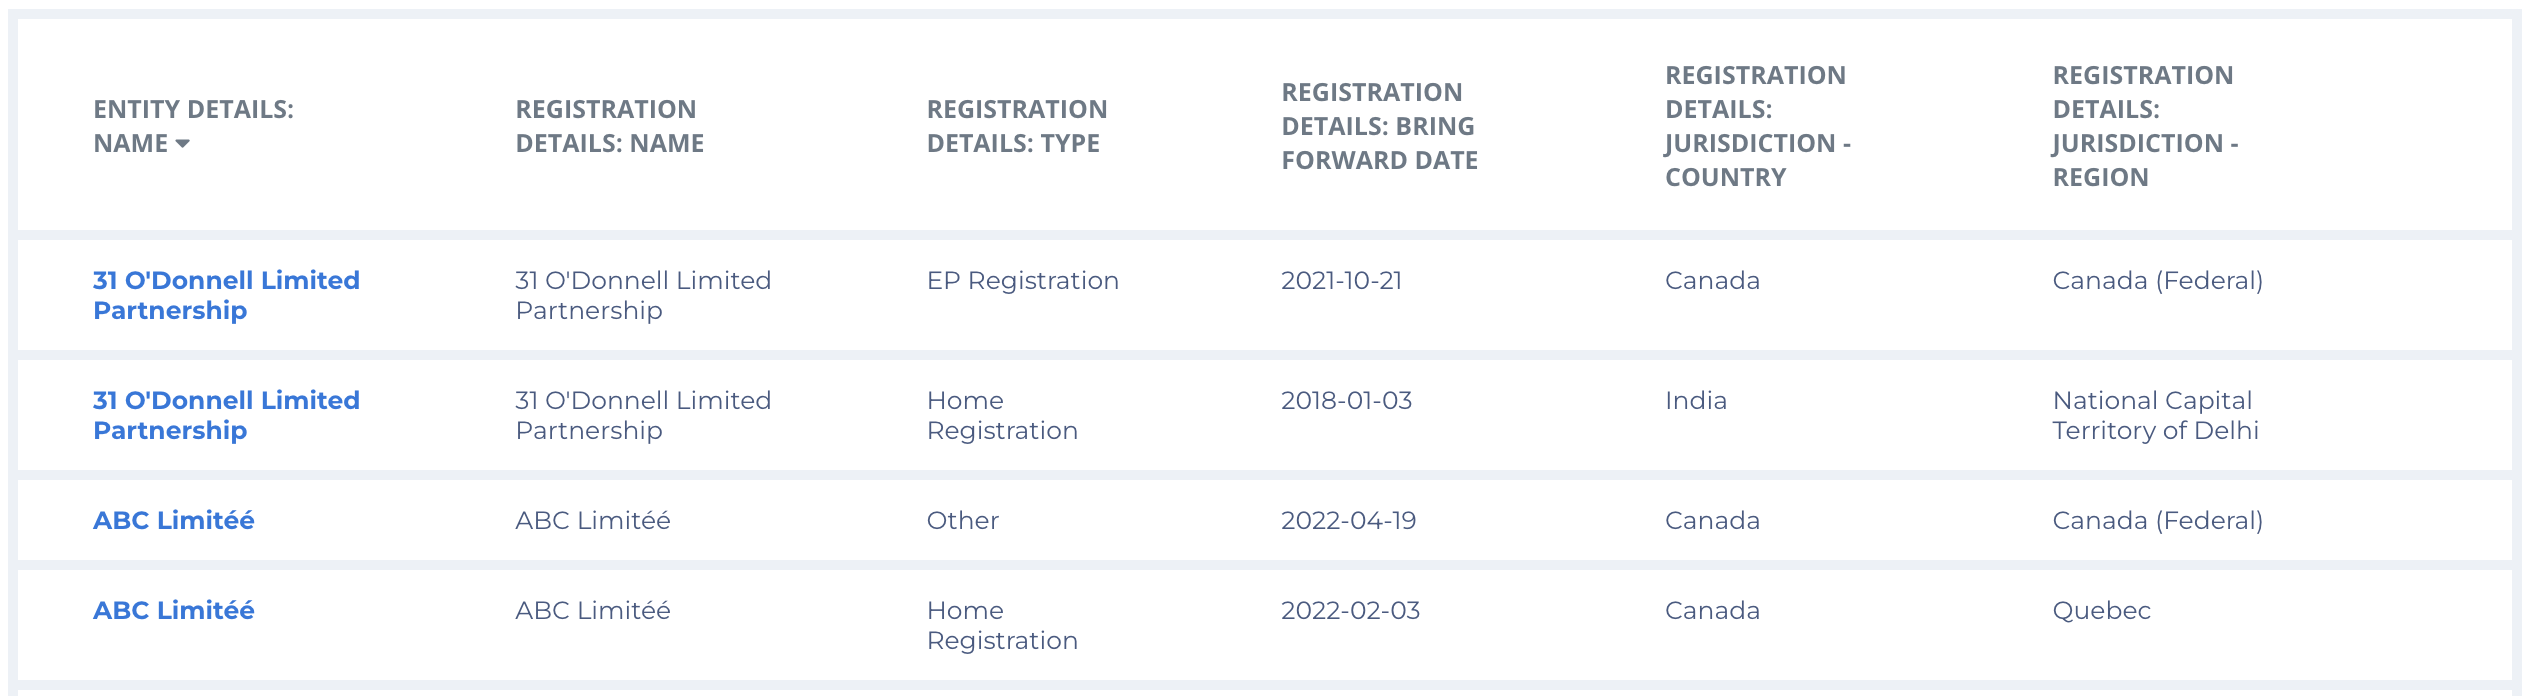 Home_and_all_other_registrations_report.png